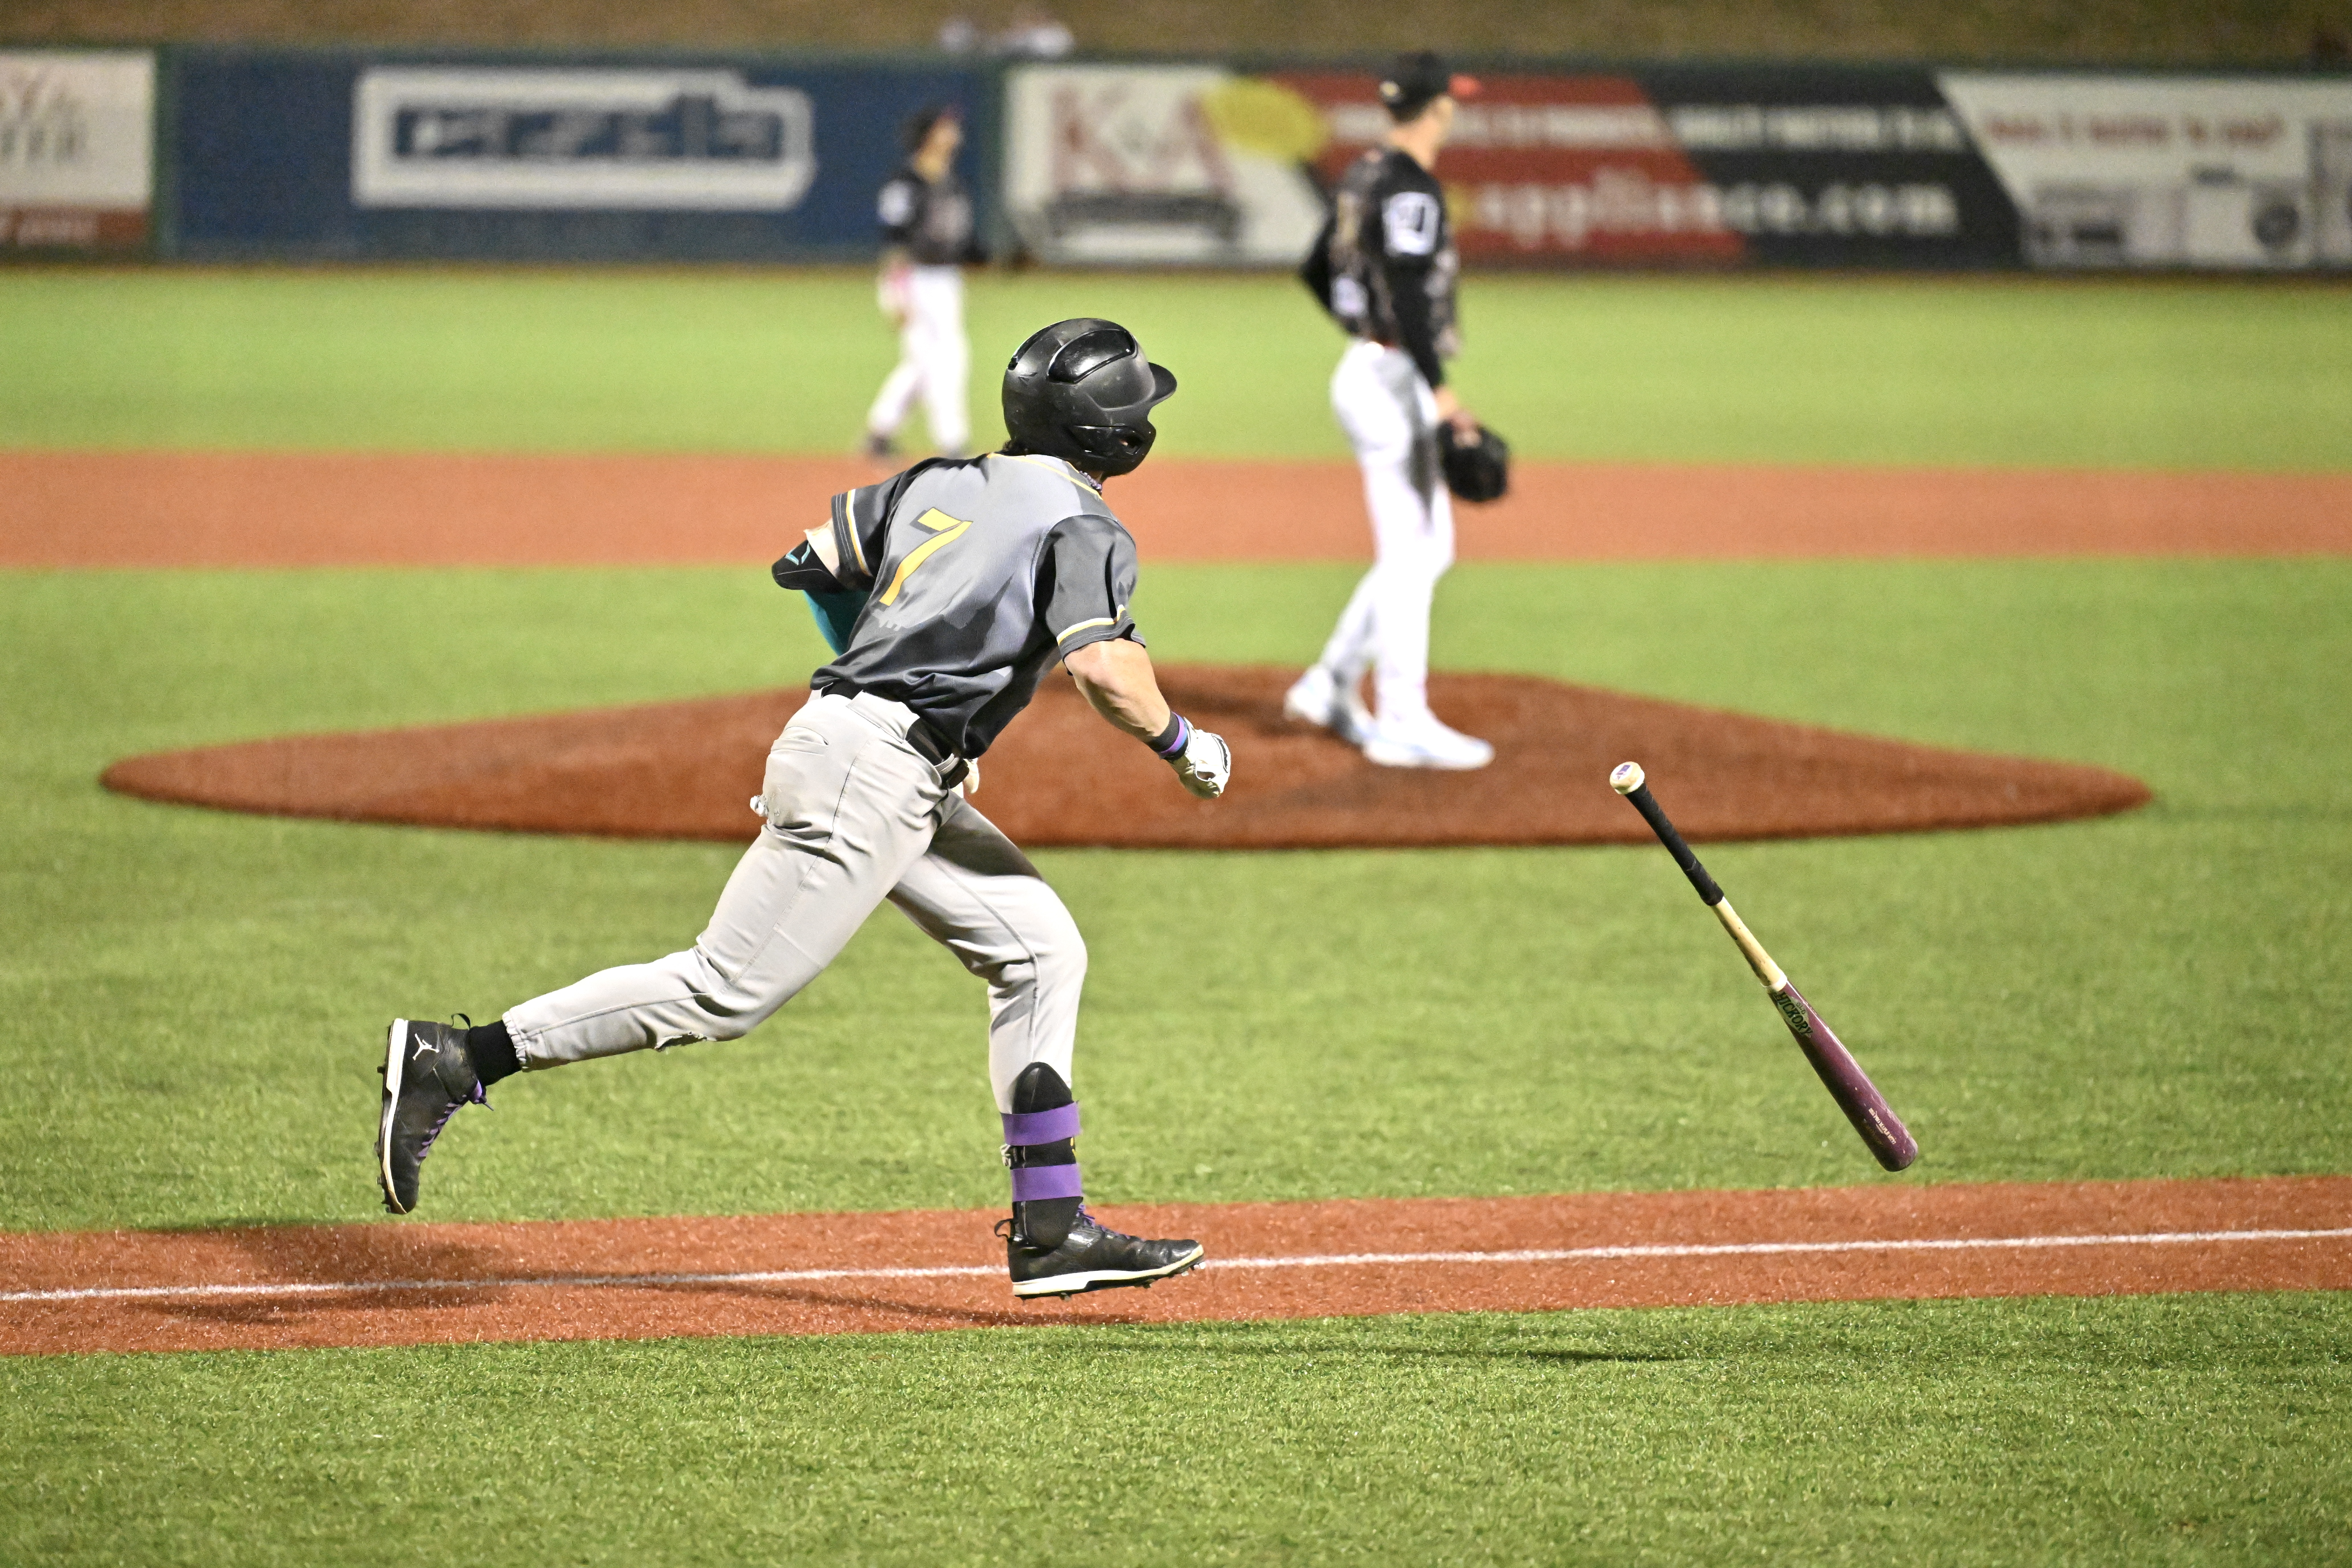 Revs Make More War of the Roses History with Thrilling Ninth Inning Victory